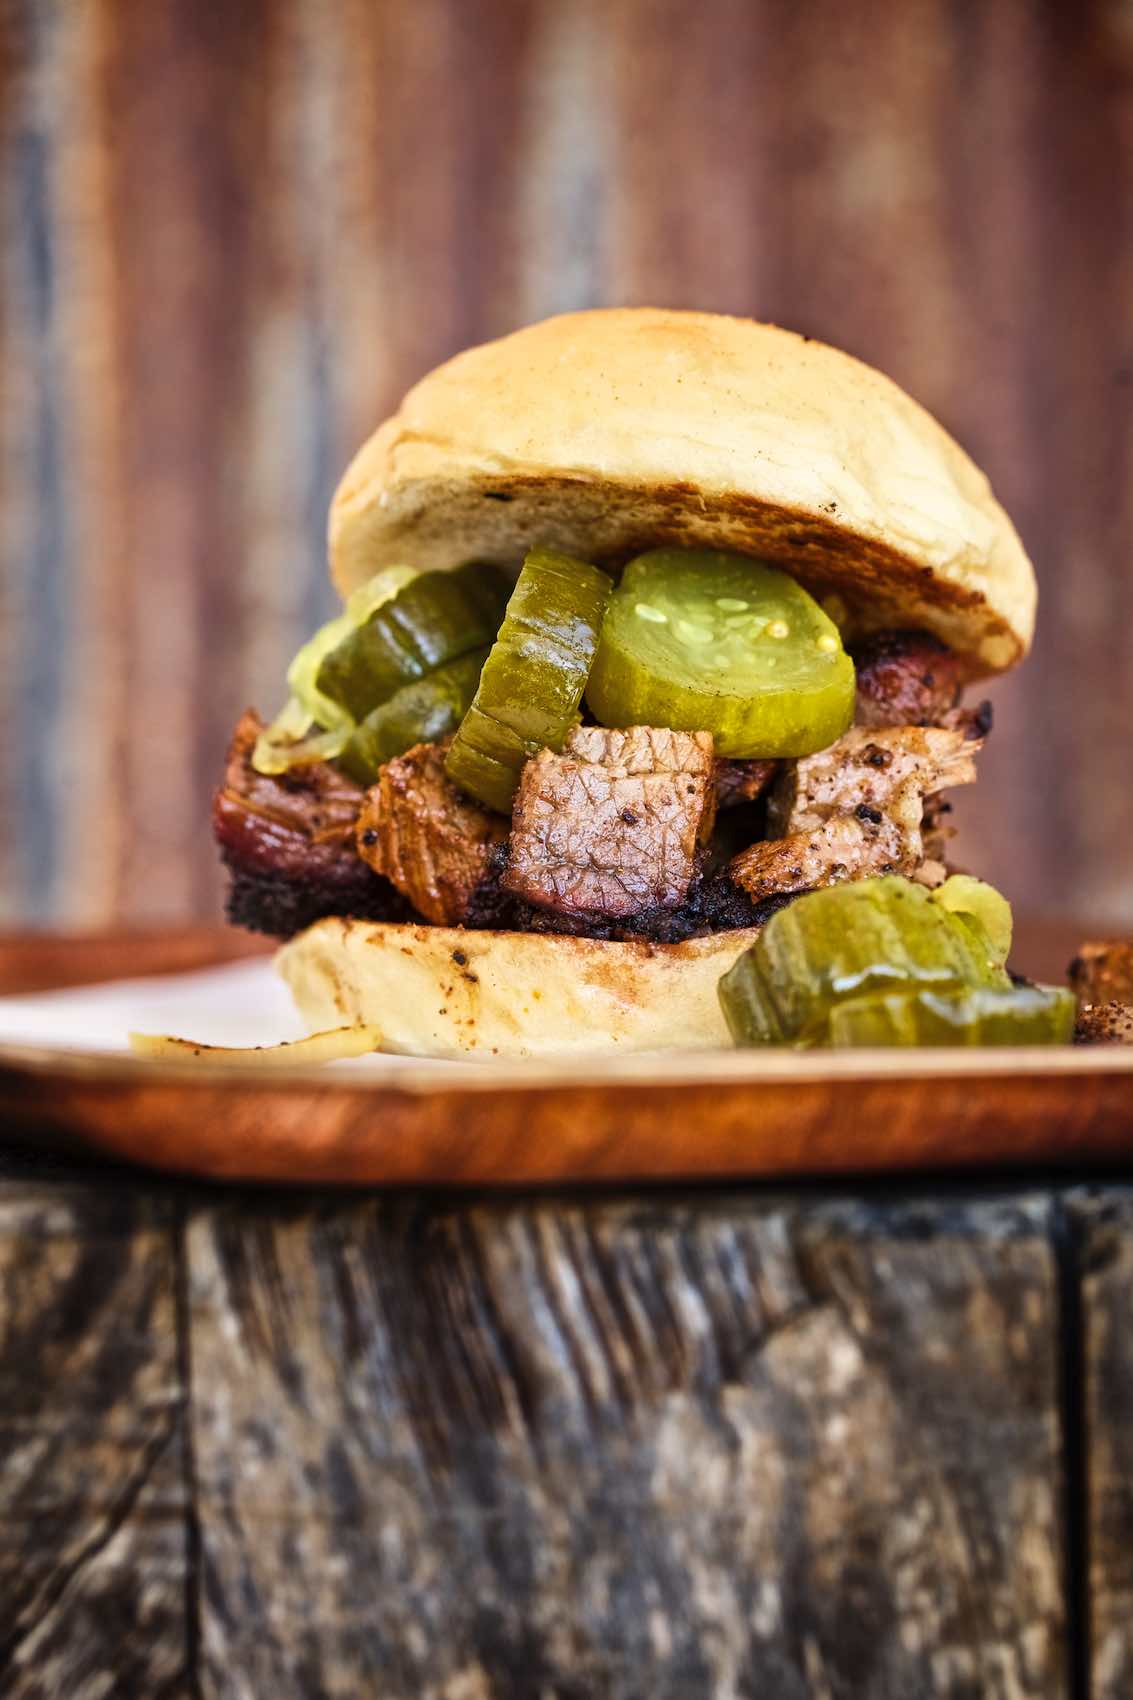 Jody Horton Photography - Barbecue sandwich with bread and butter pickles.